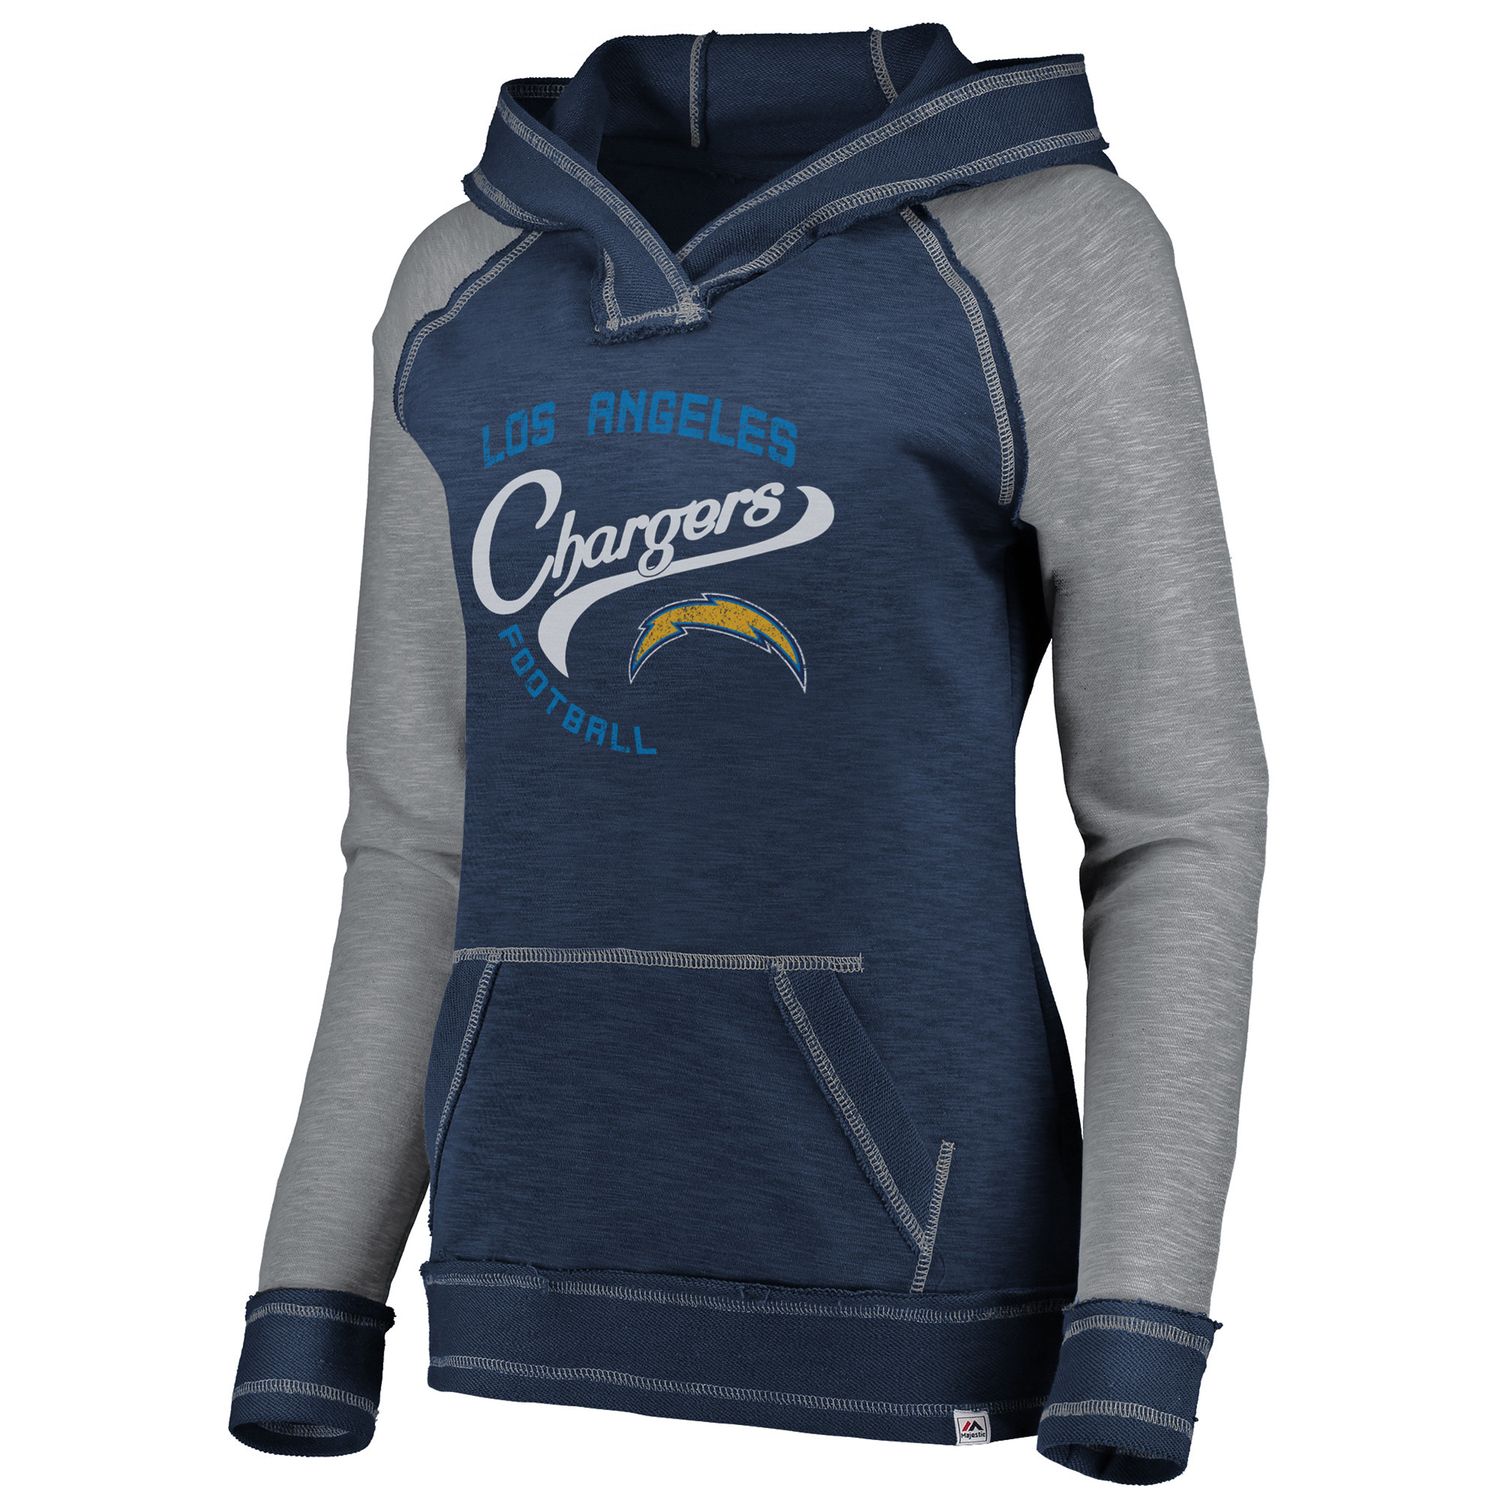 women's chargers hoodie